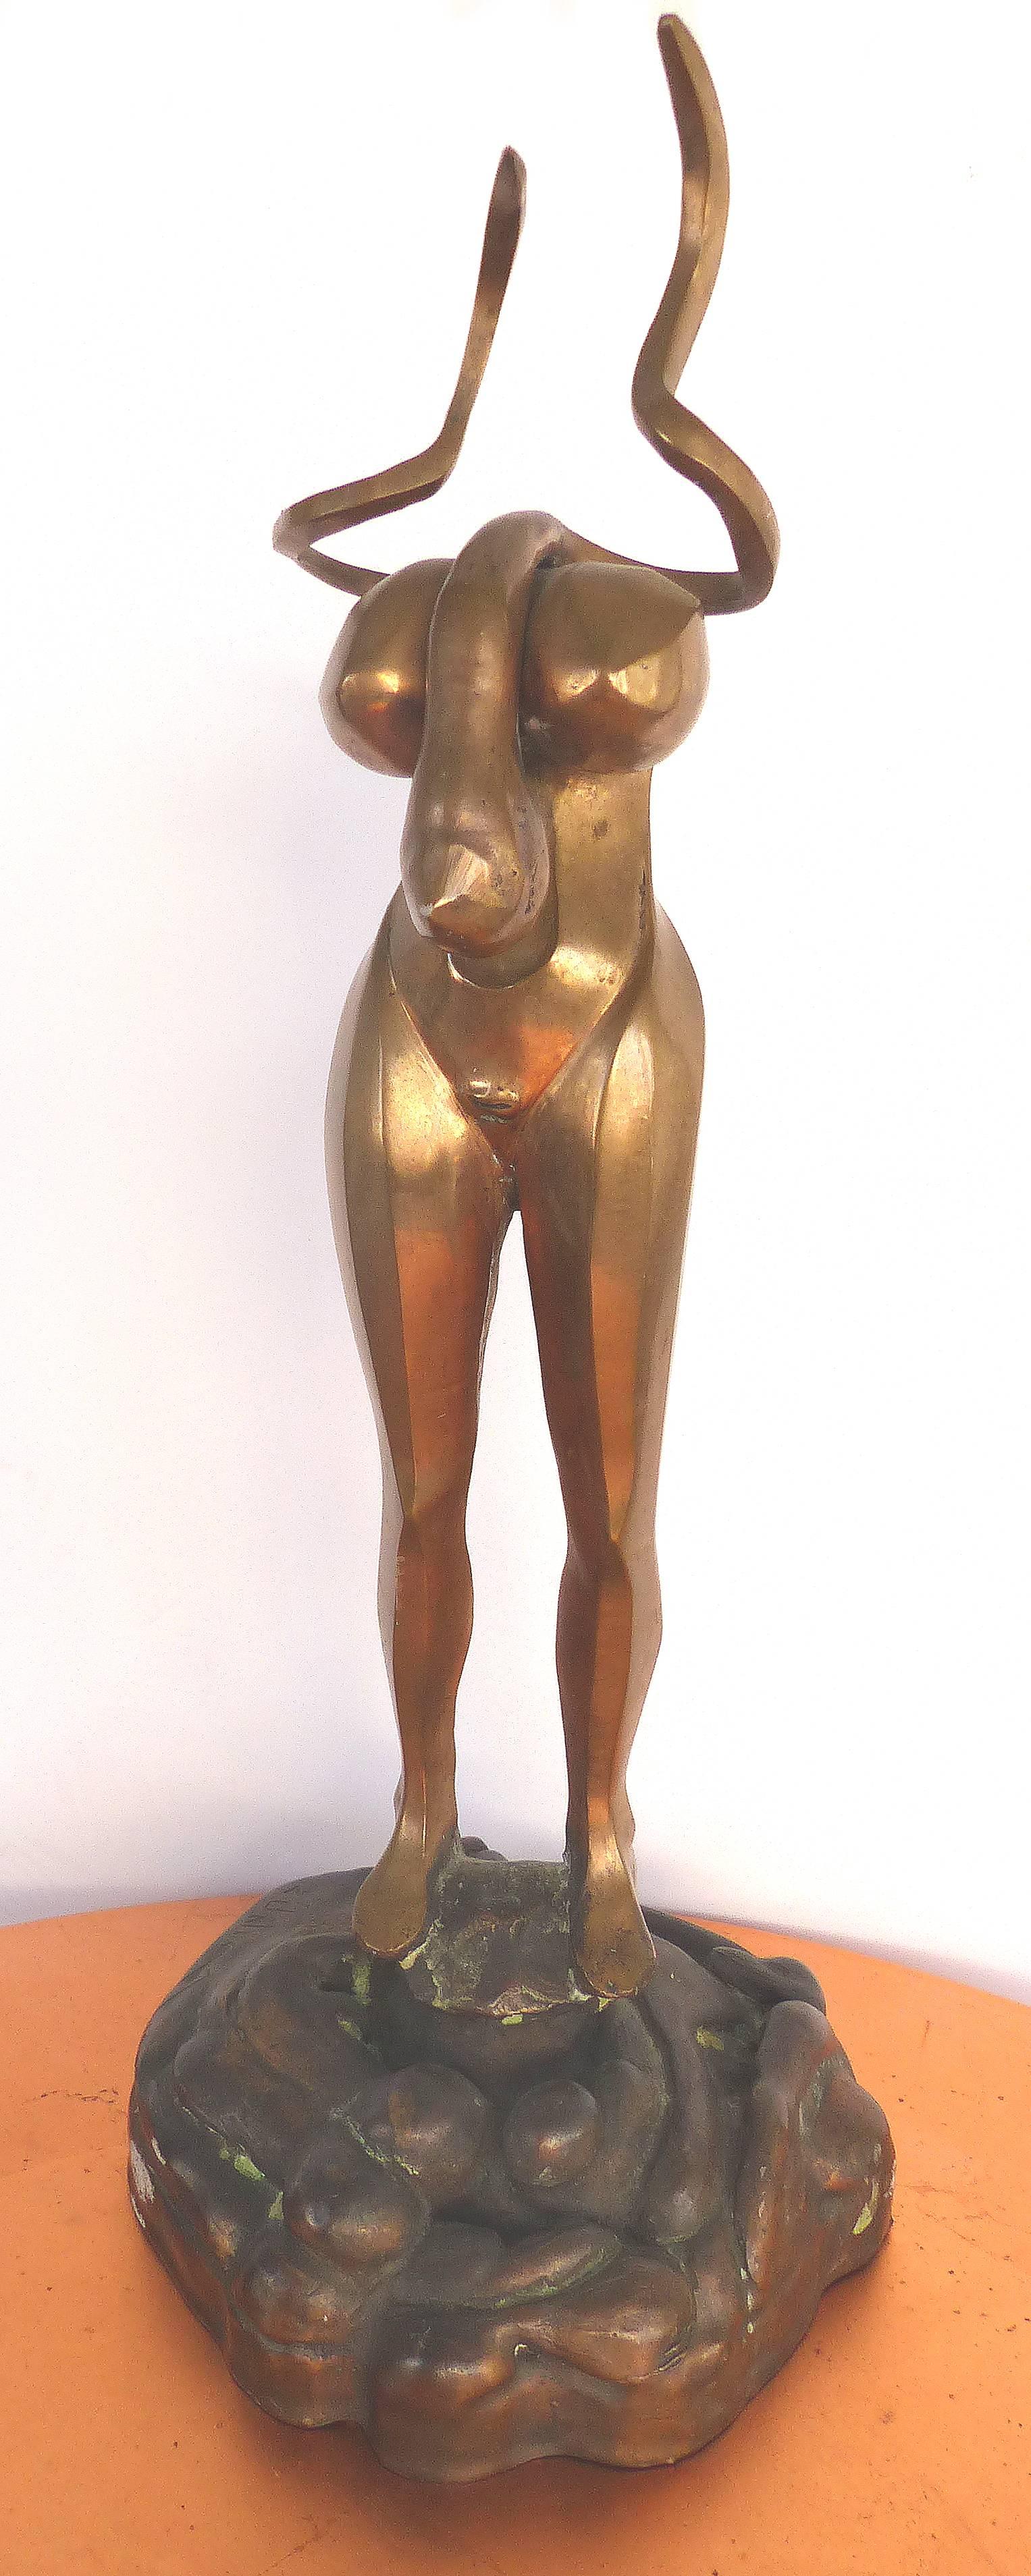 Surrealist Figurative Bronze Signed Zuñiga and Dated, 1977

Offered for sale is a rare estate find of a gilt and patinated bronze of a surrealist standing figure with grotesque features. Signed Zuñiga on the patinated base and dated 1977. As we are